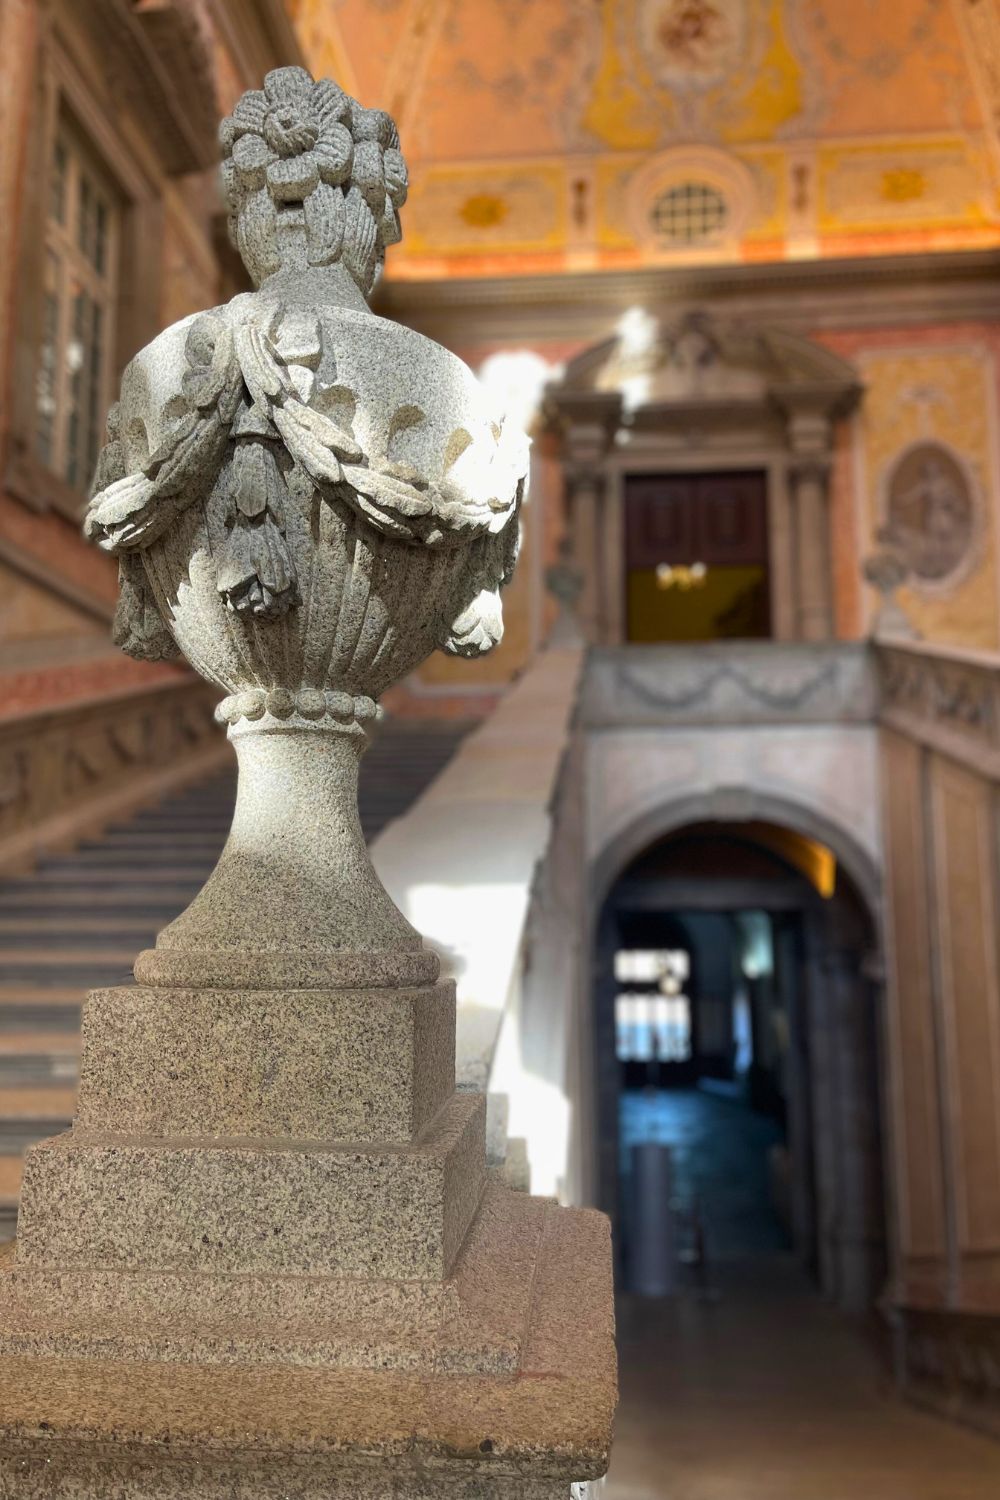 Close-up of a decorative stone vase on the balustrade of a grand staircase, with a softly focused background of a richly adorned hallway with golden detailing.